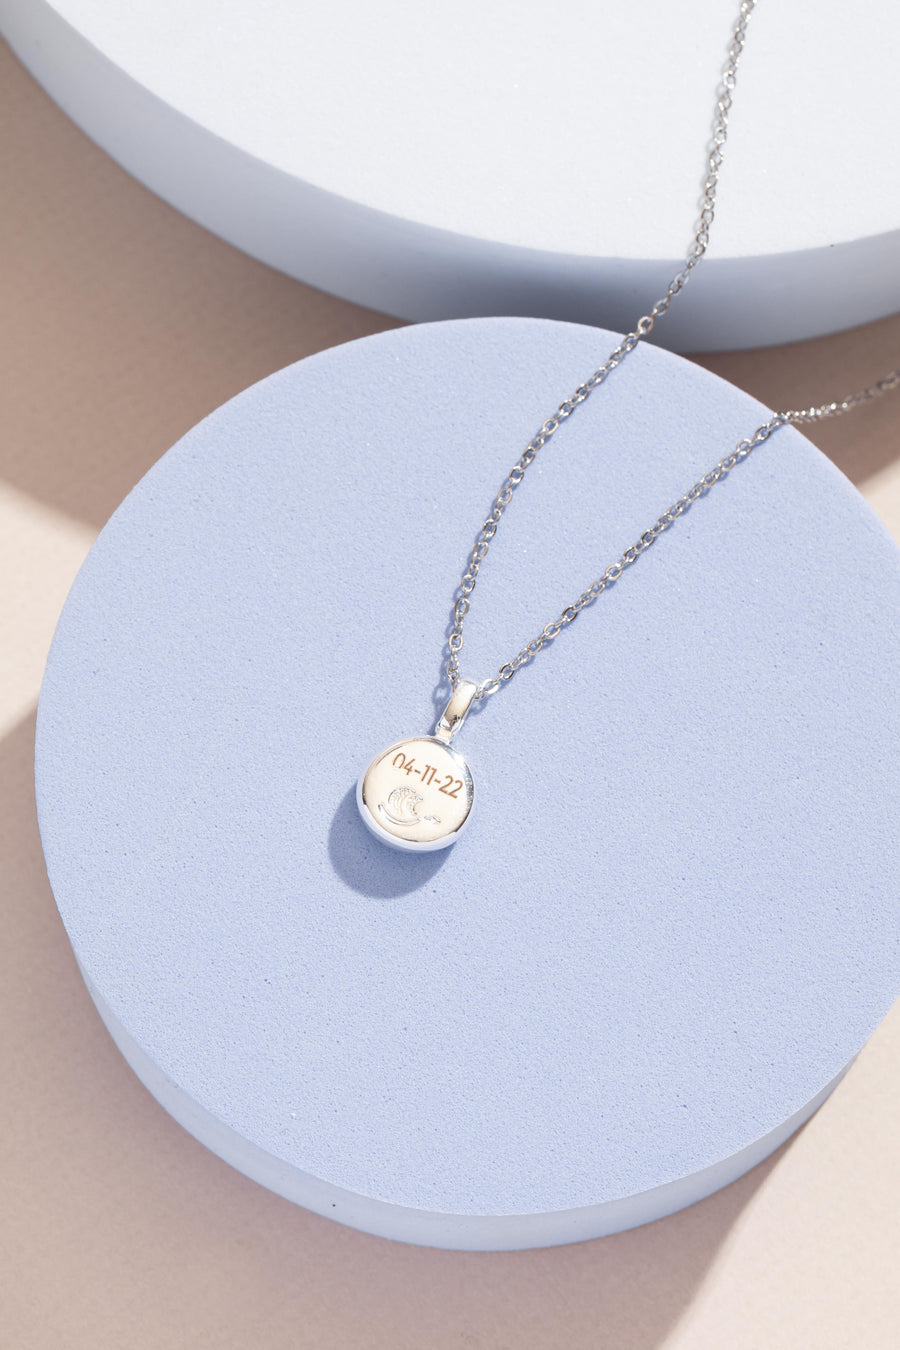 Charmed Simplicity and Silver Sky Light Necklaces